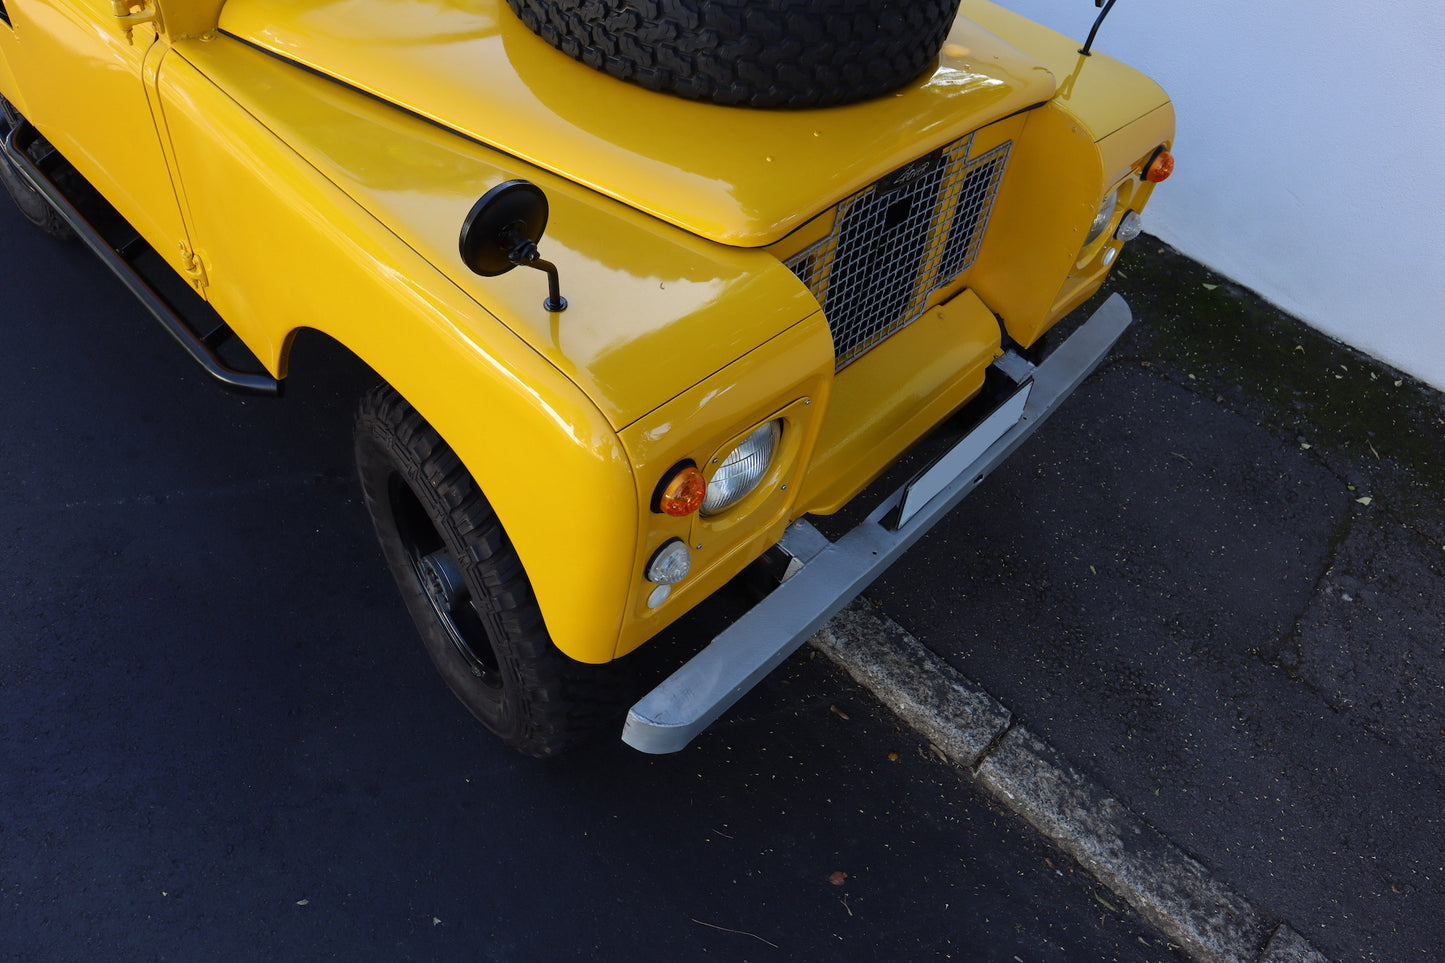 1972 Land Rover Series 2A - Yellow